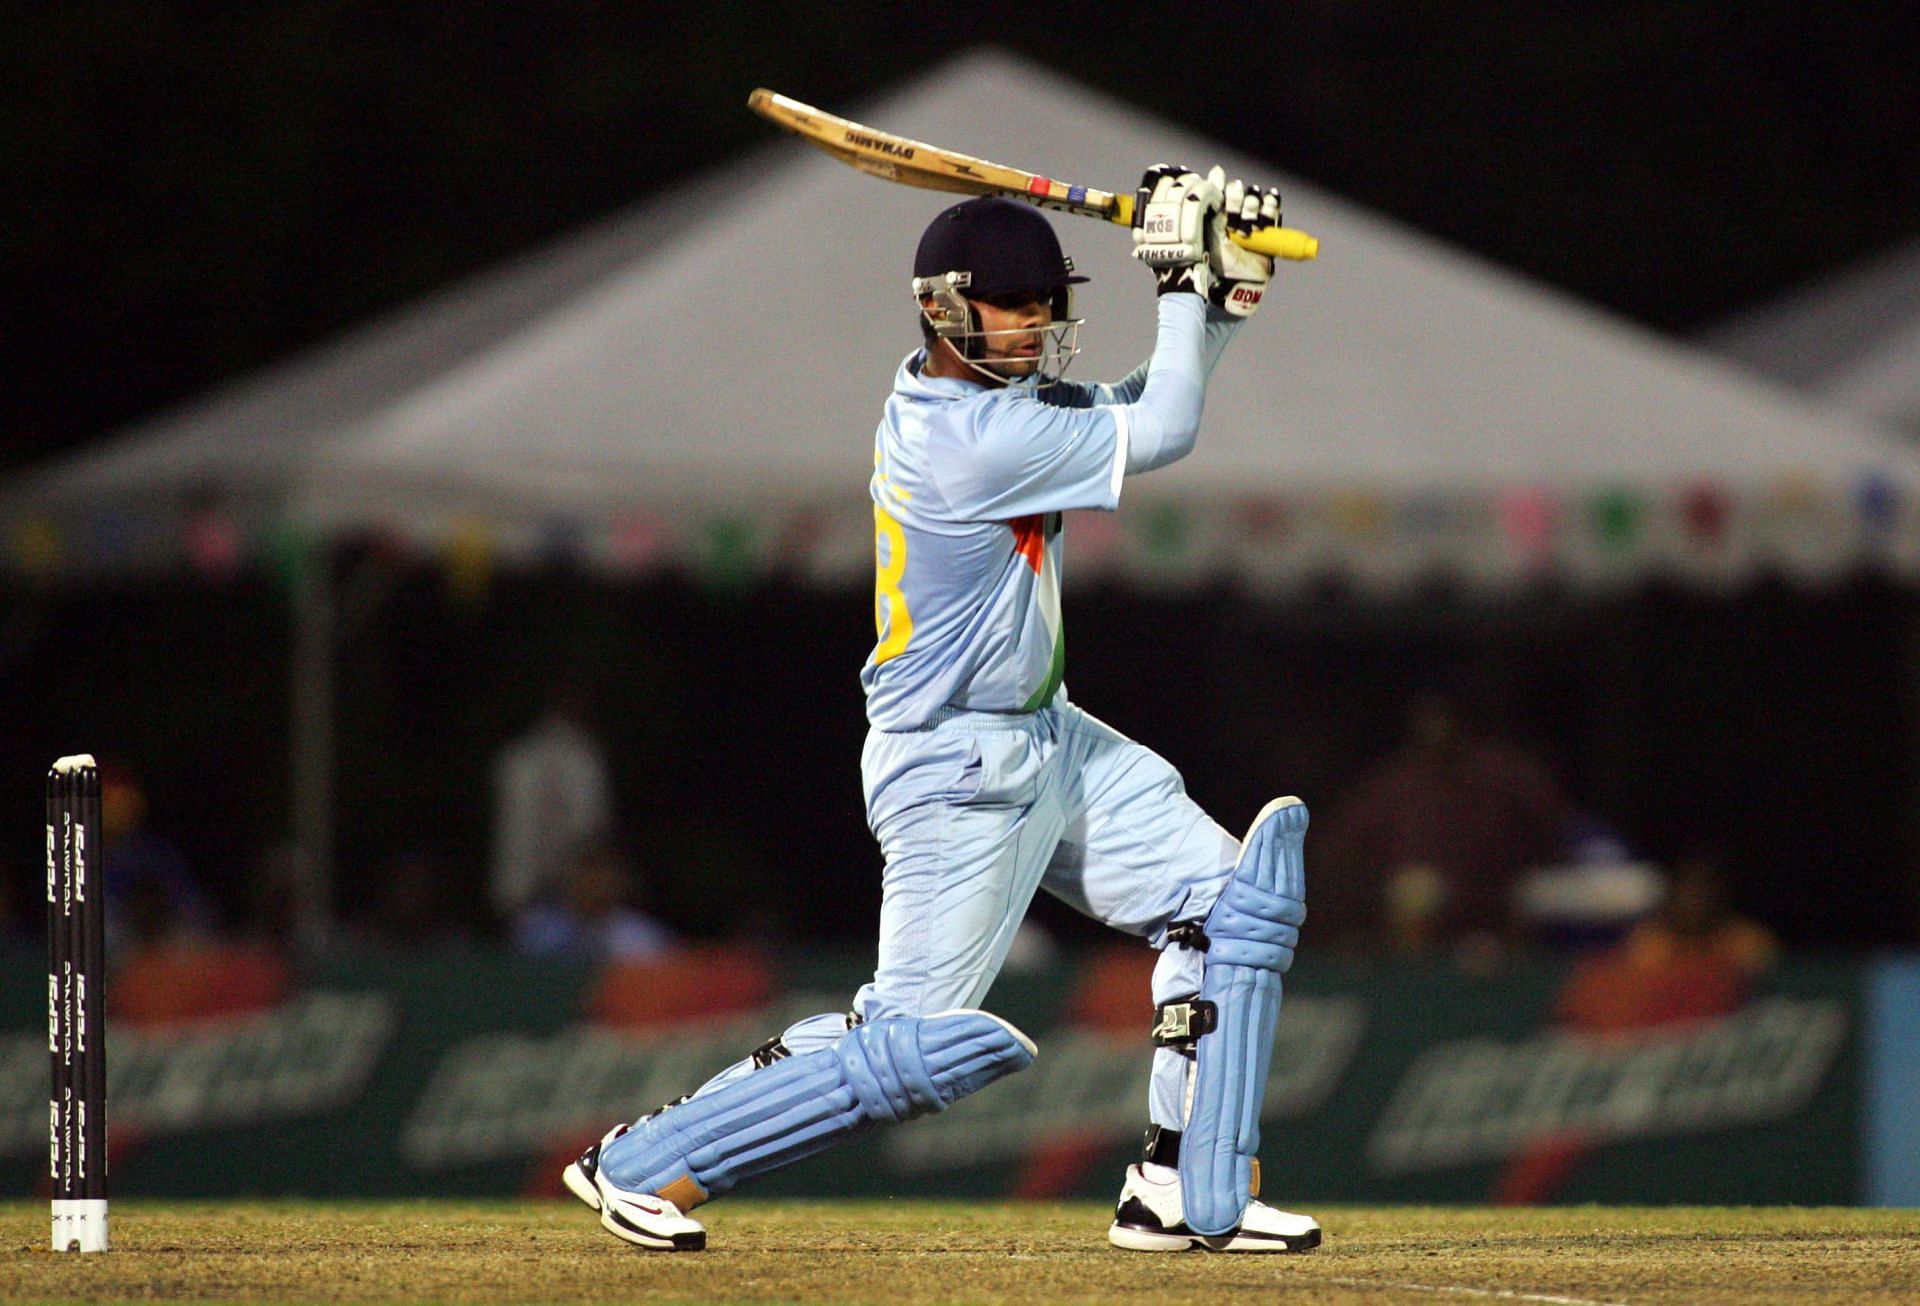 Virat Kohli led the Indian team in the 2008 U-19 World Cup. (Pic: Getty Images)